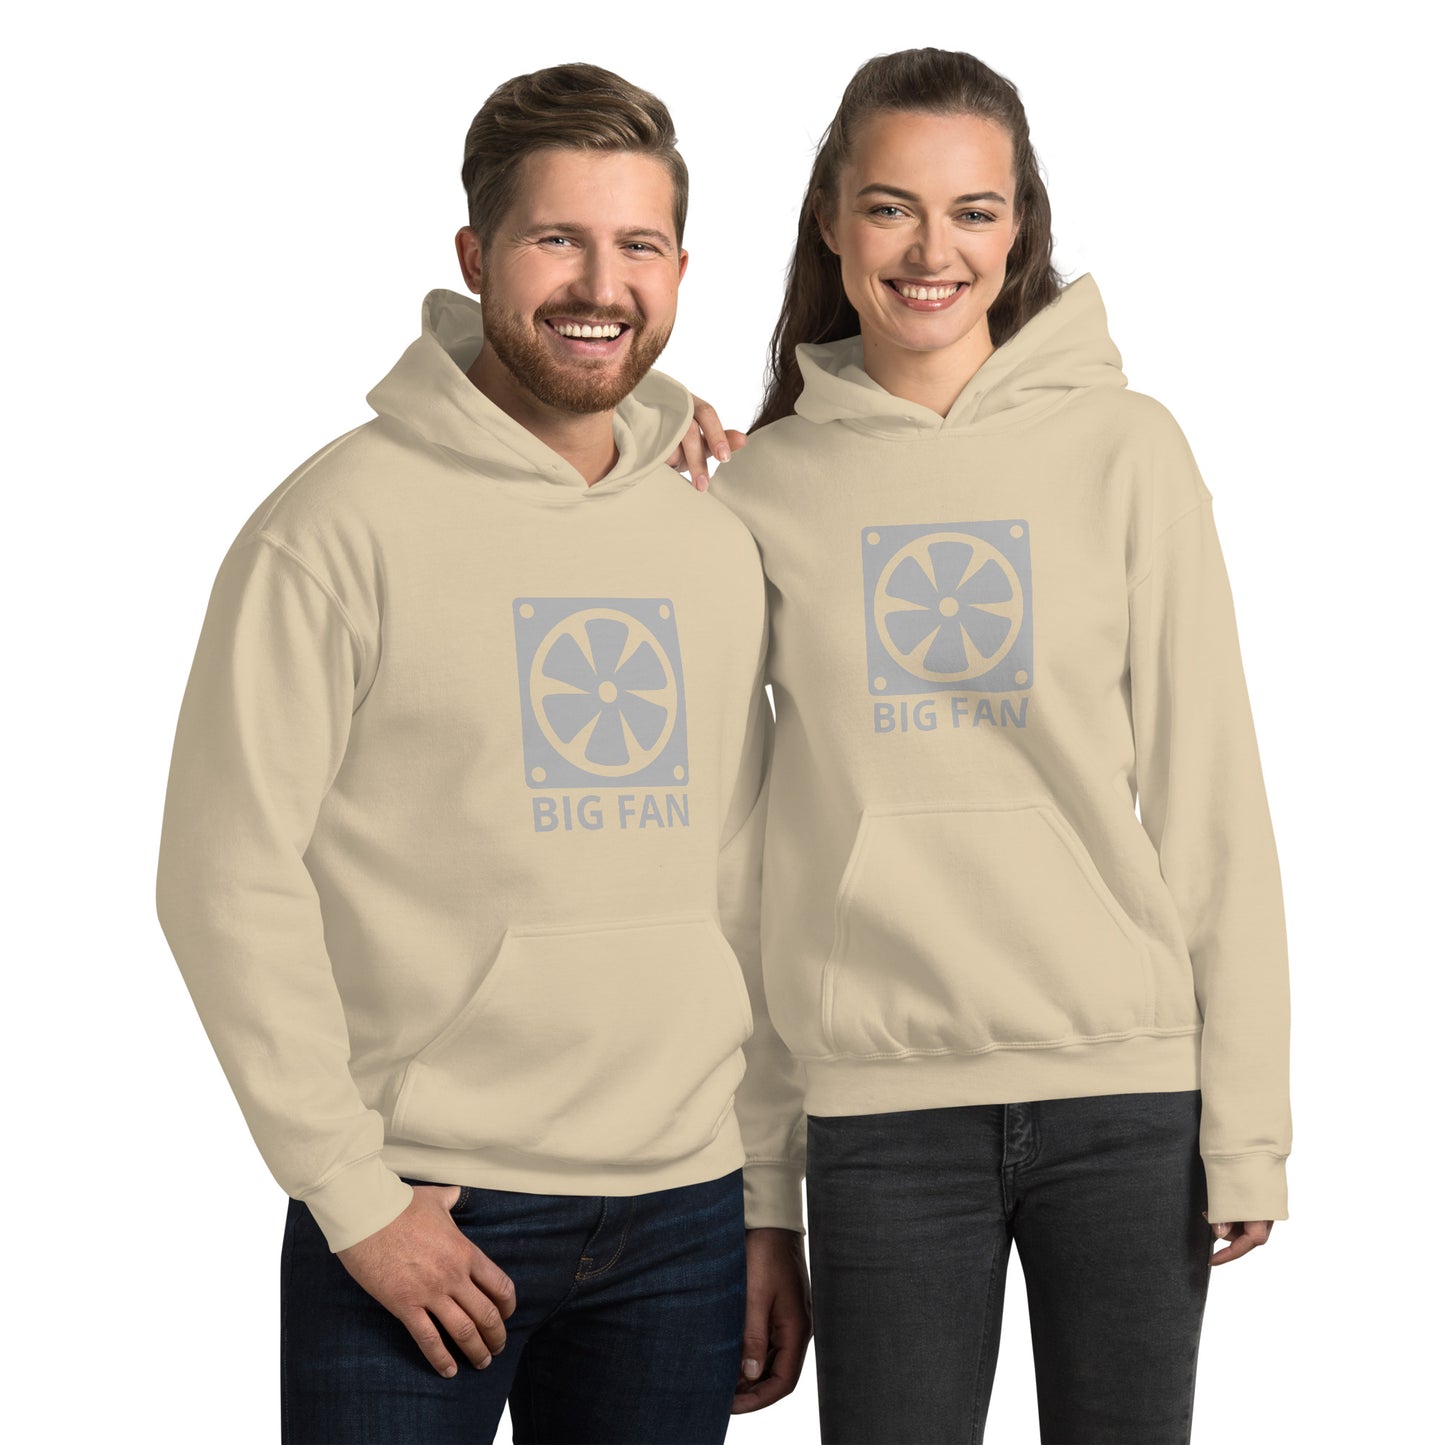 Man and women with sand hoodie with image of a big computer fan and the text "BIG FAN"